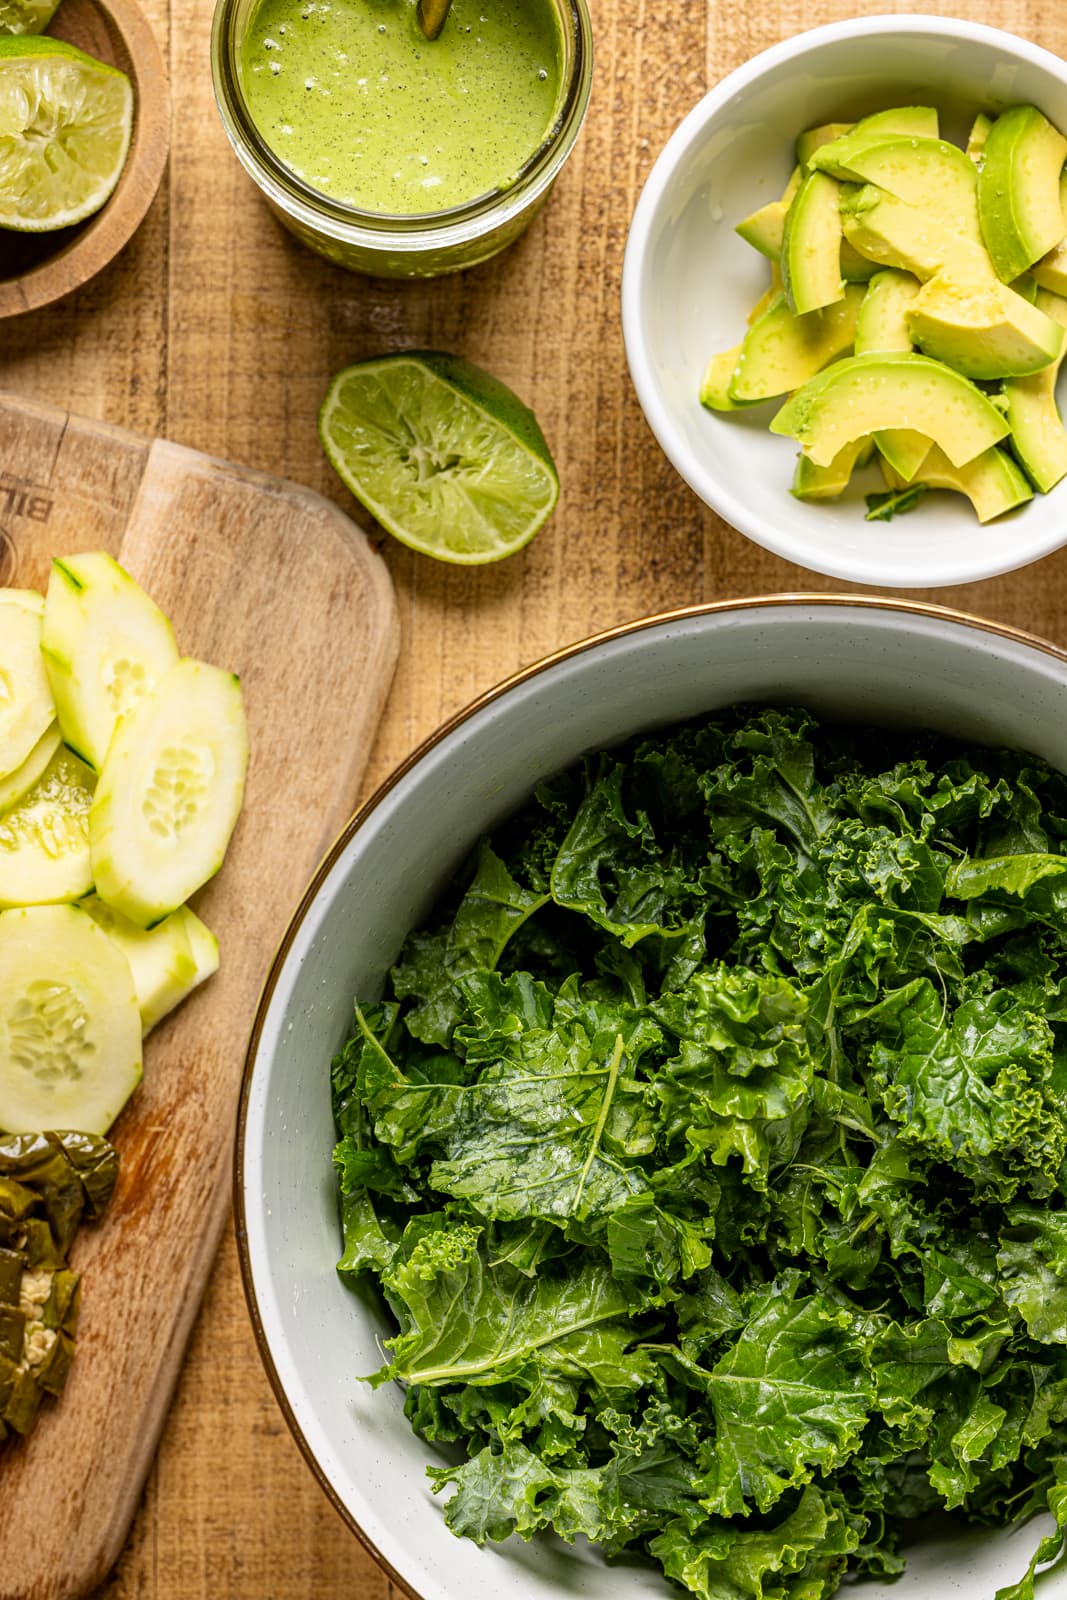 Ingredients on a wood table including kale, cucumber, lime, dressing, and avocado.